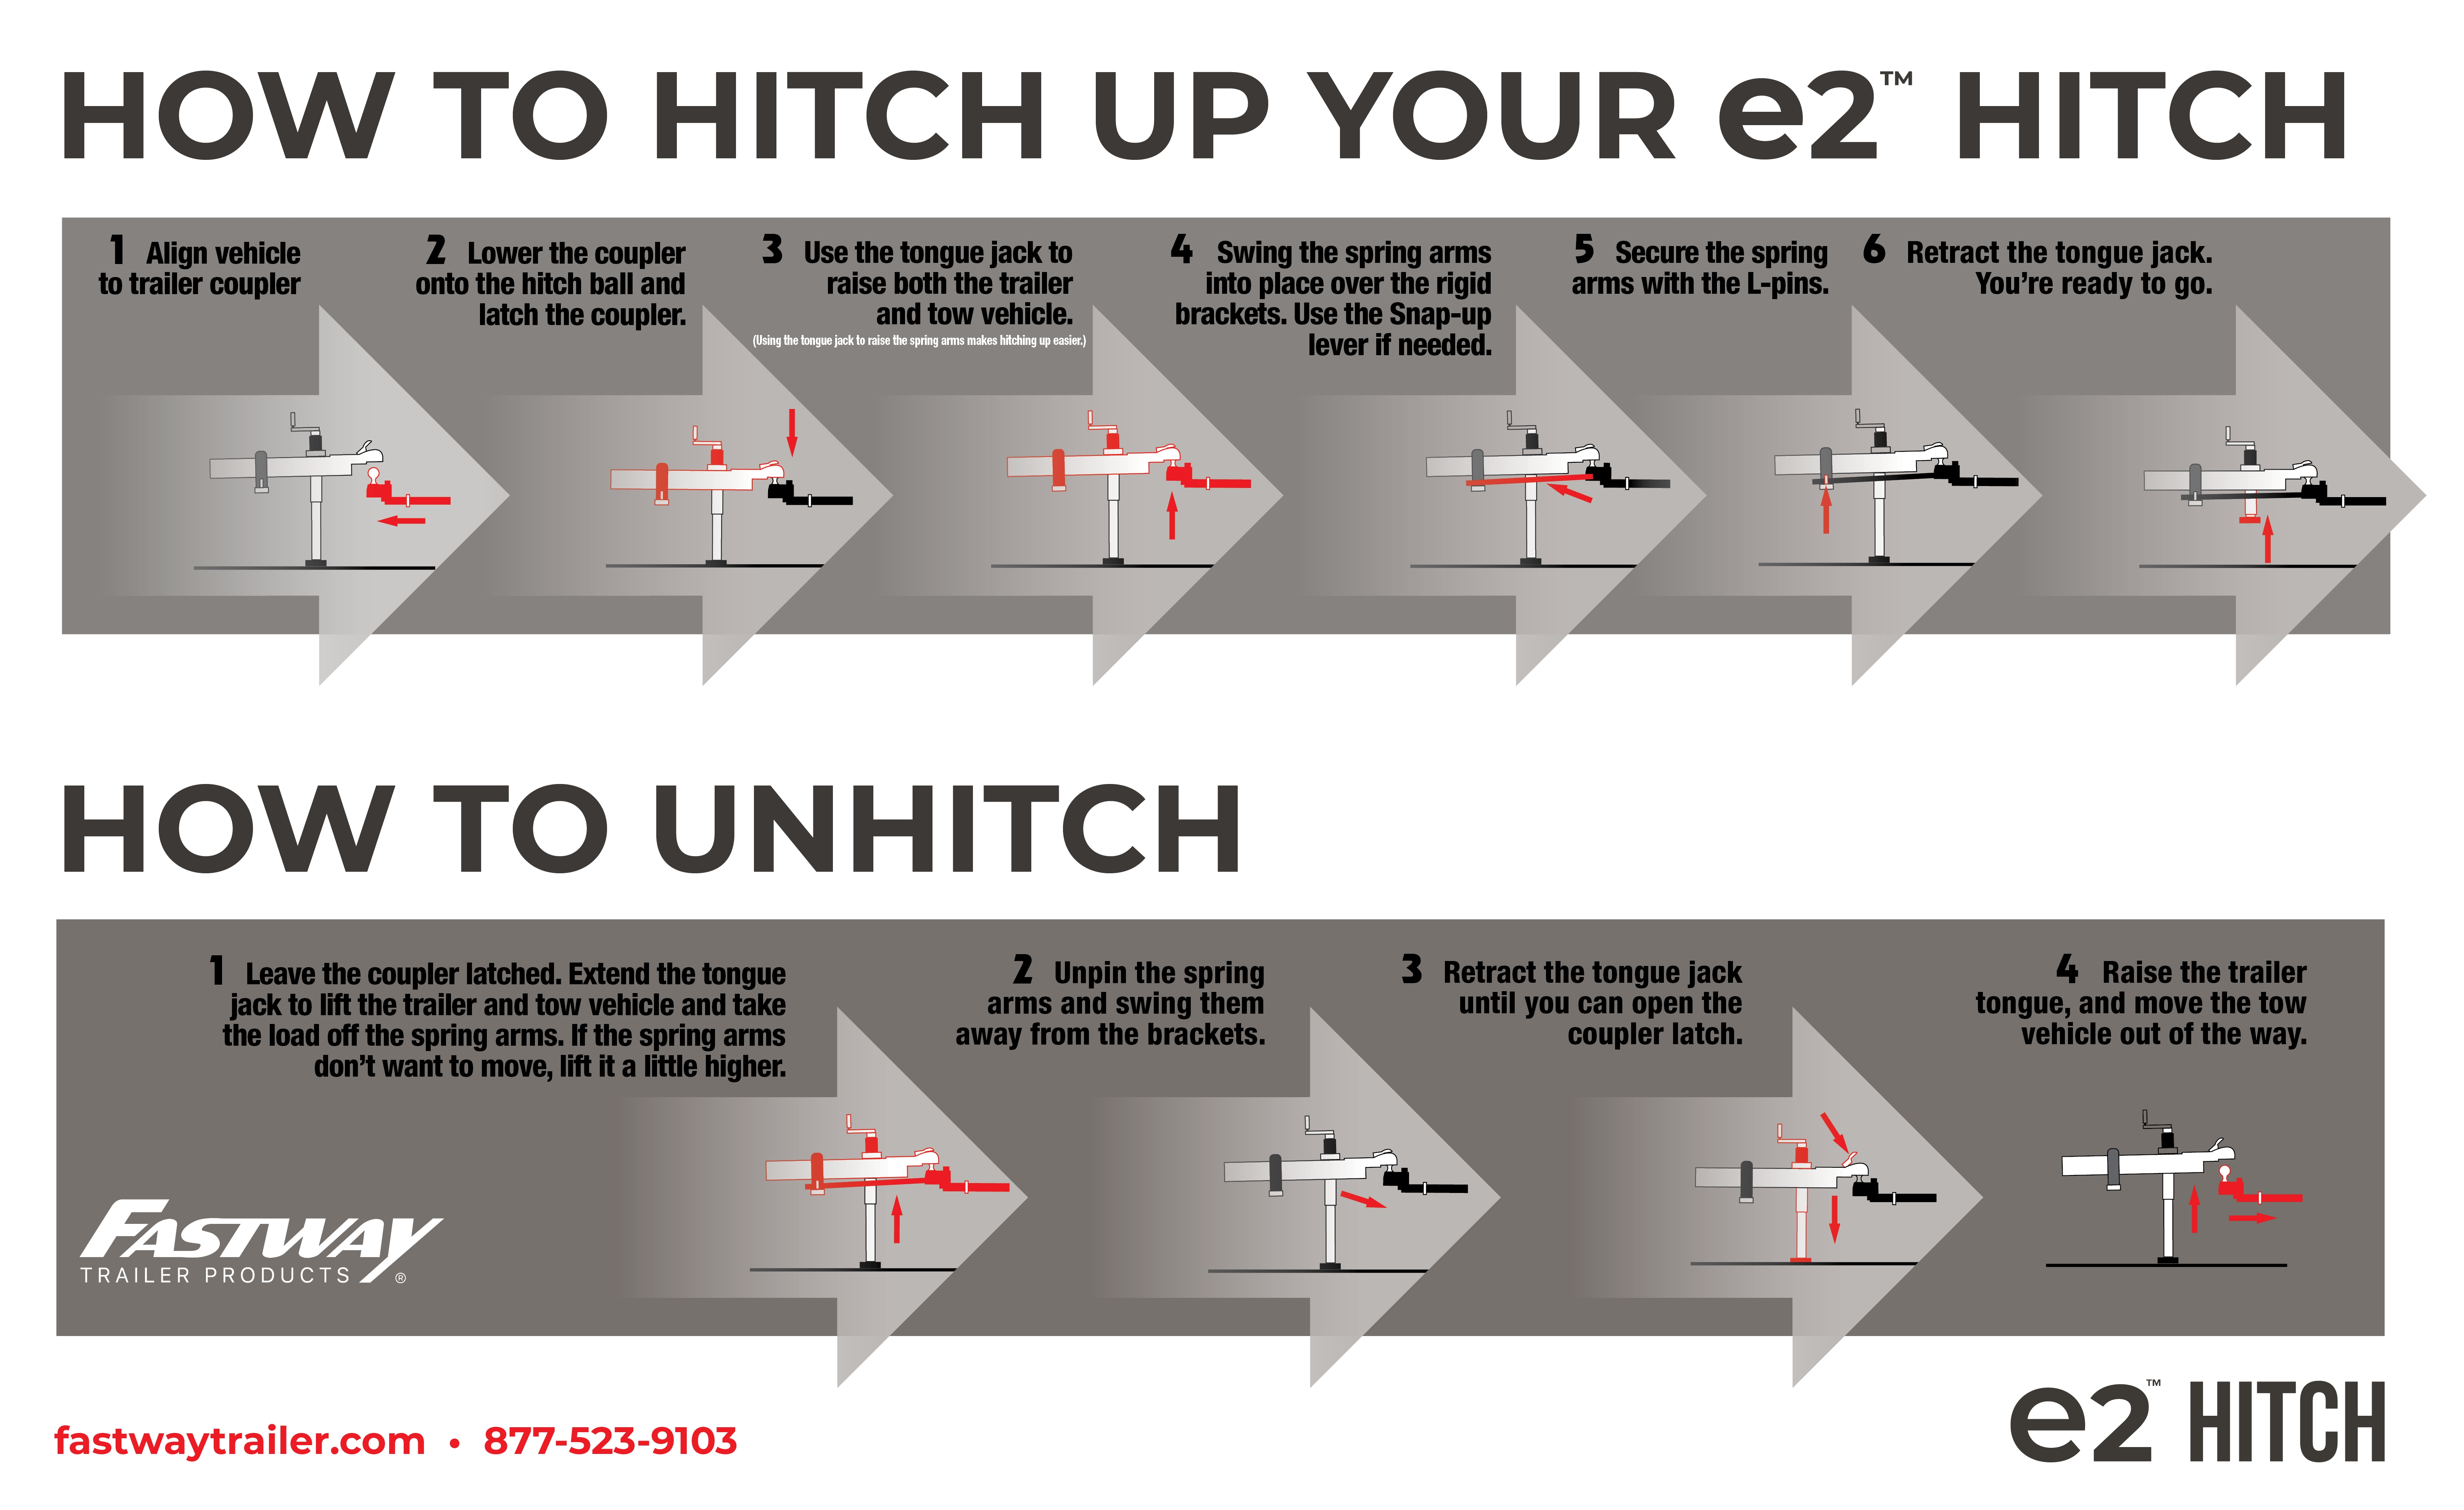 How to Hitch and Unhitch